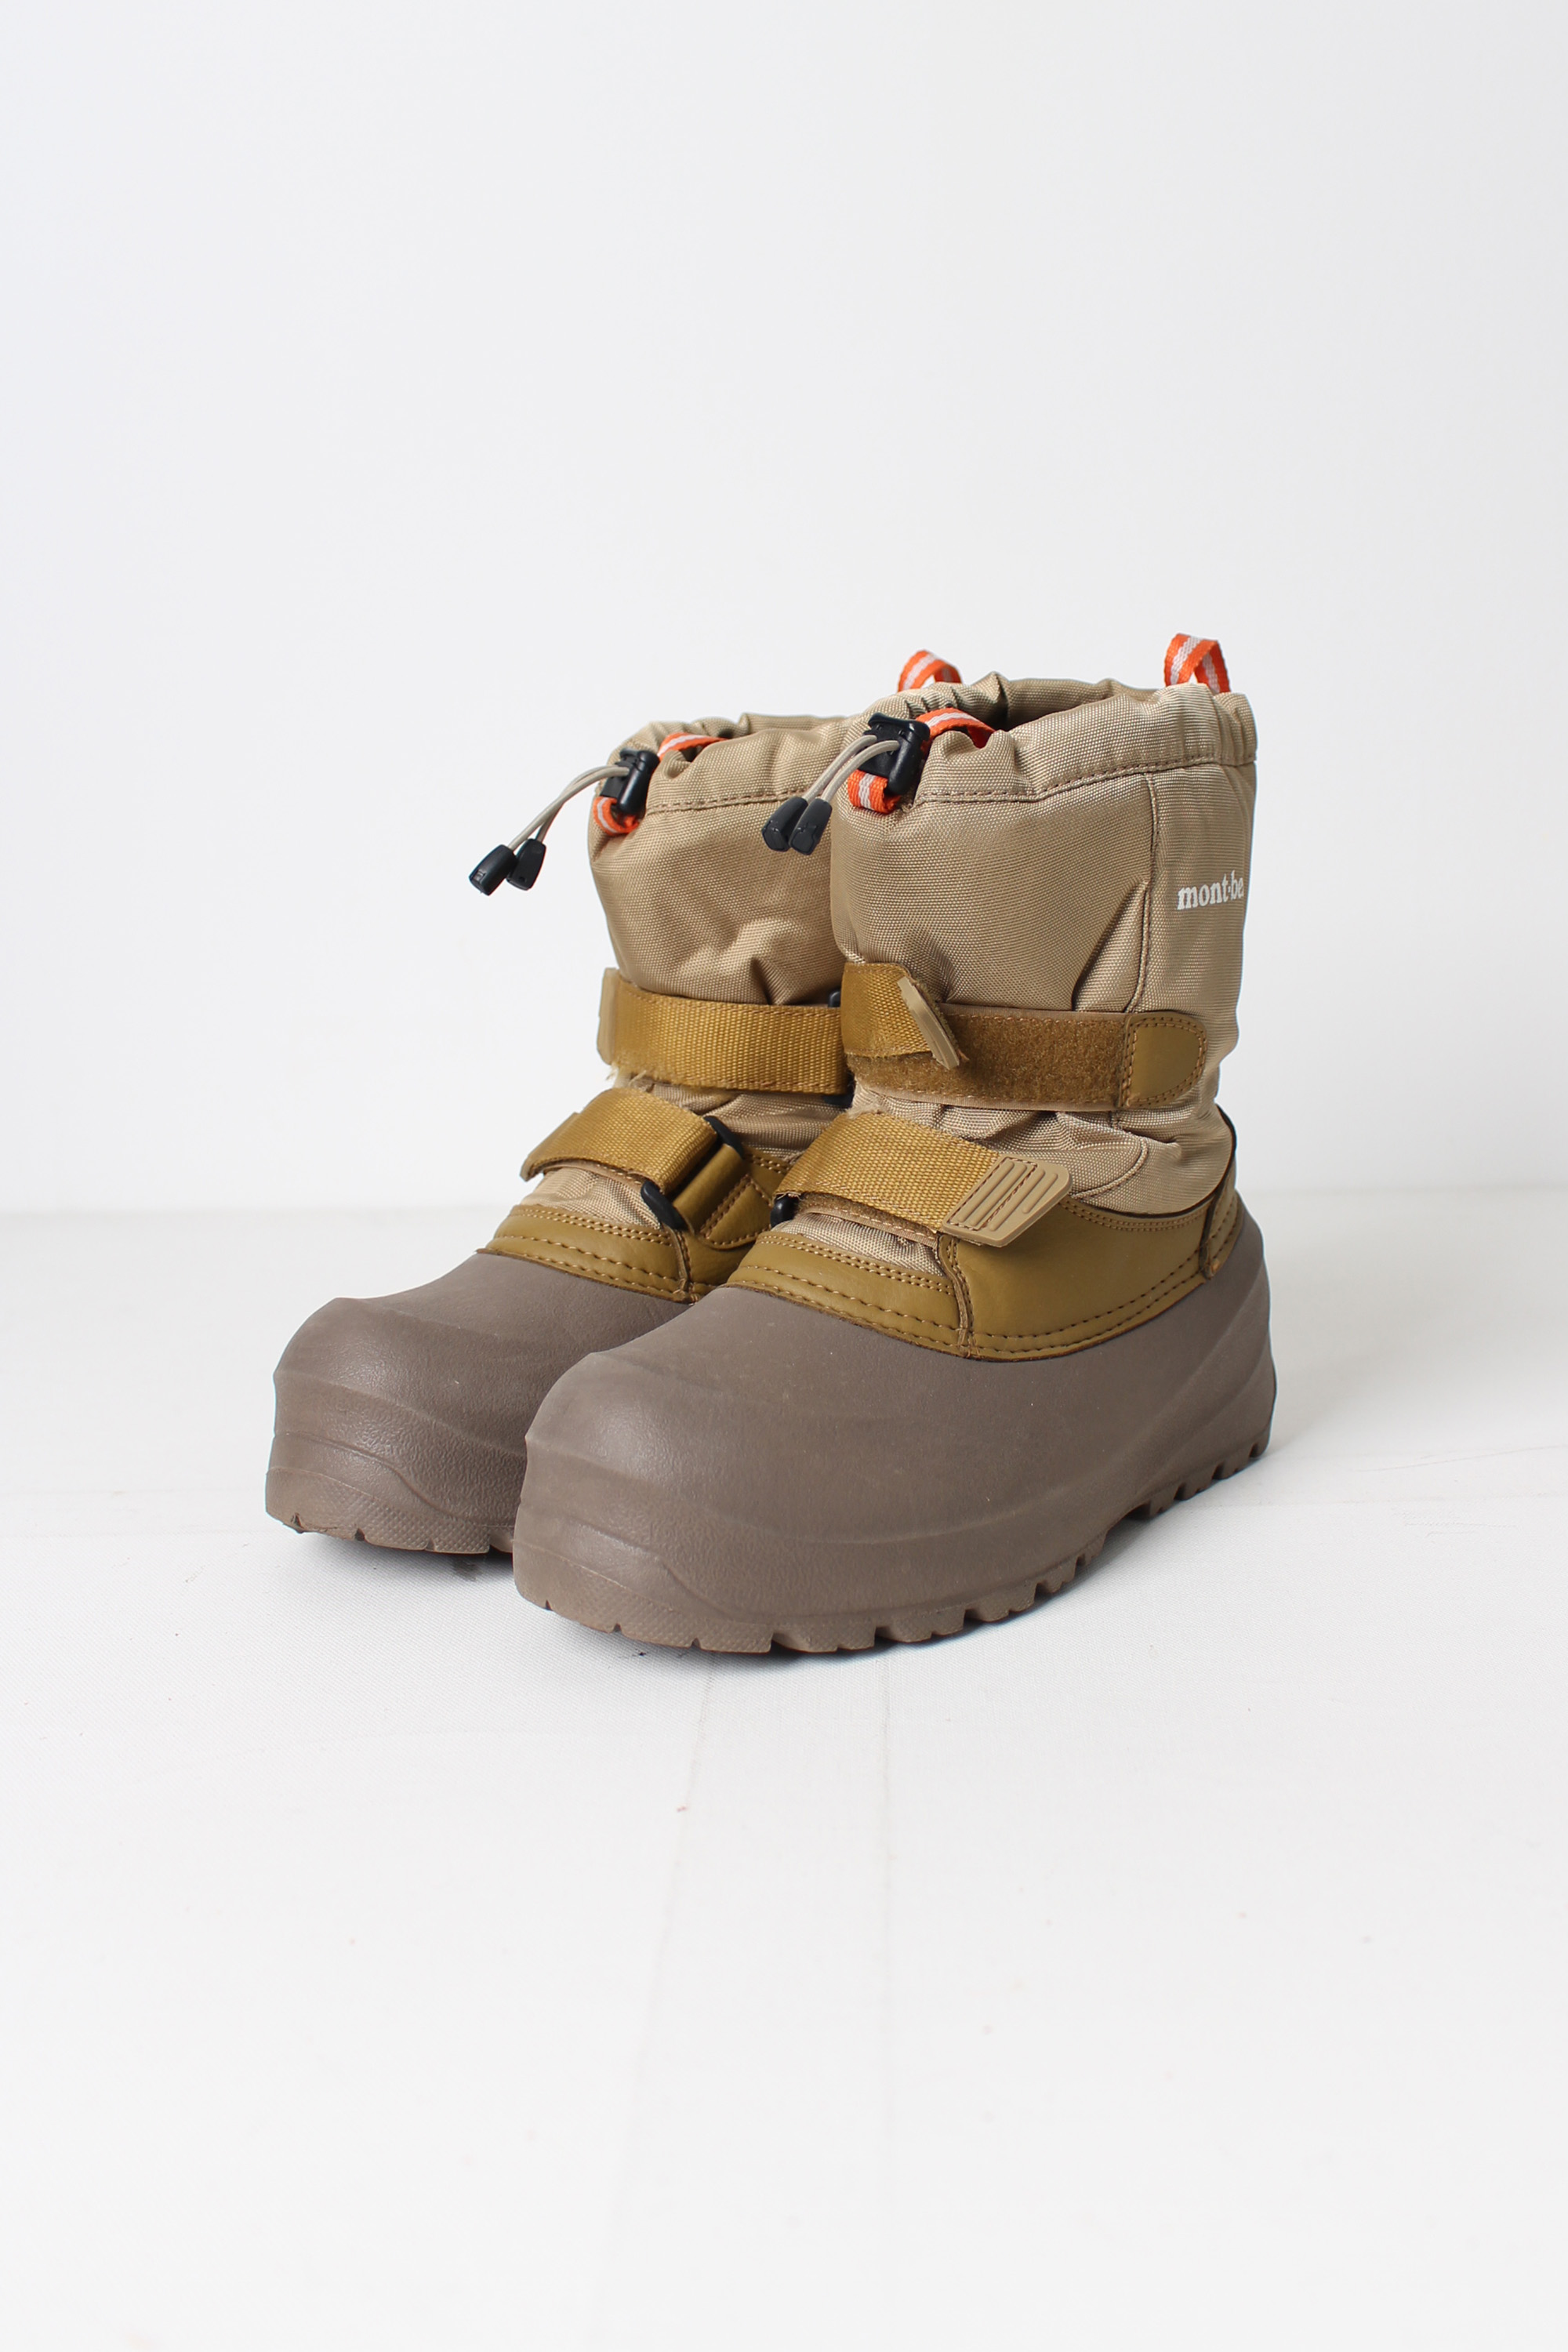 mont bell snow boots